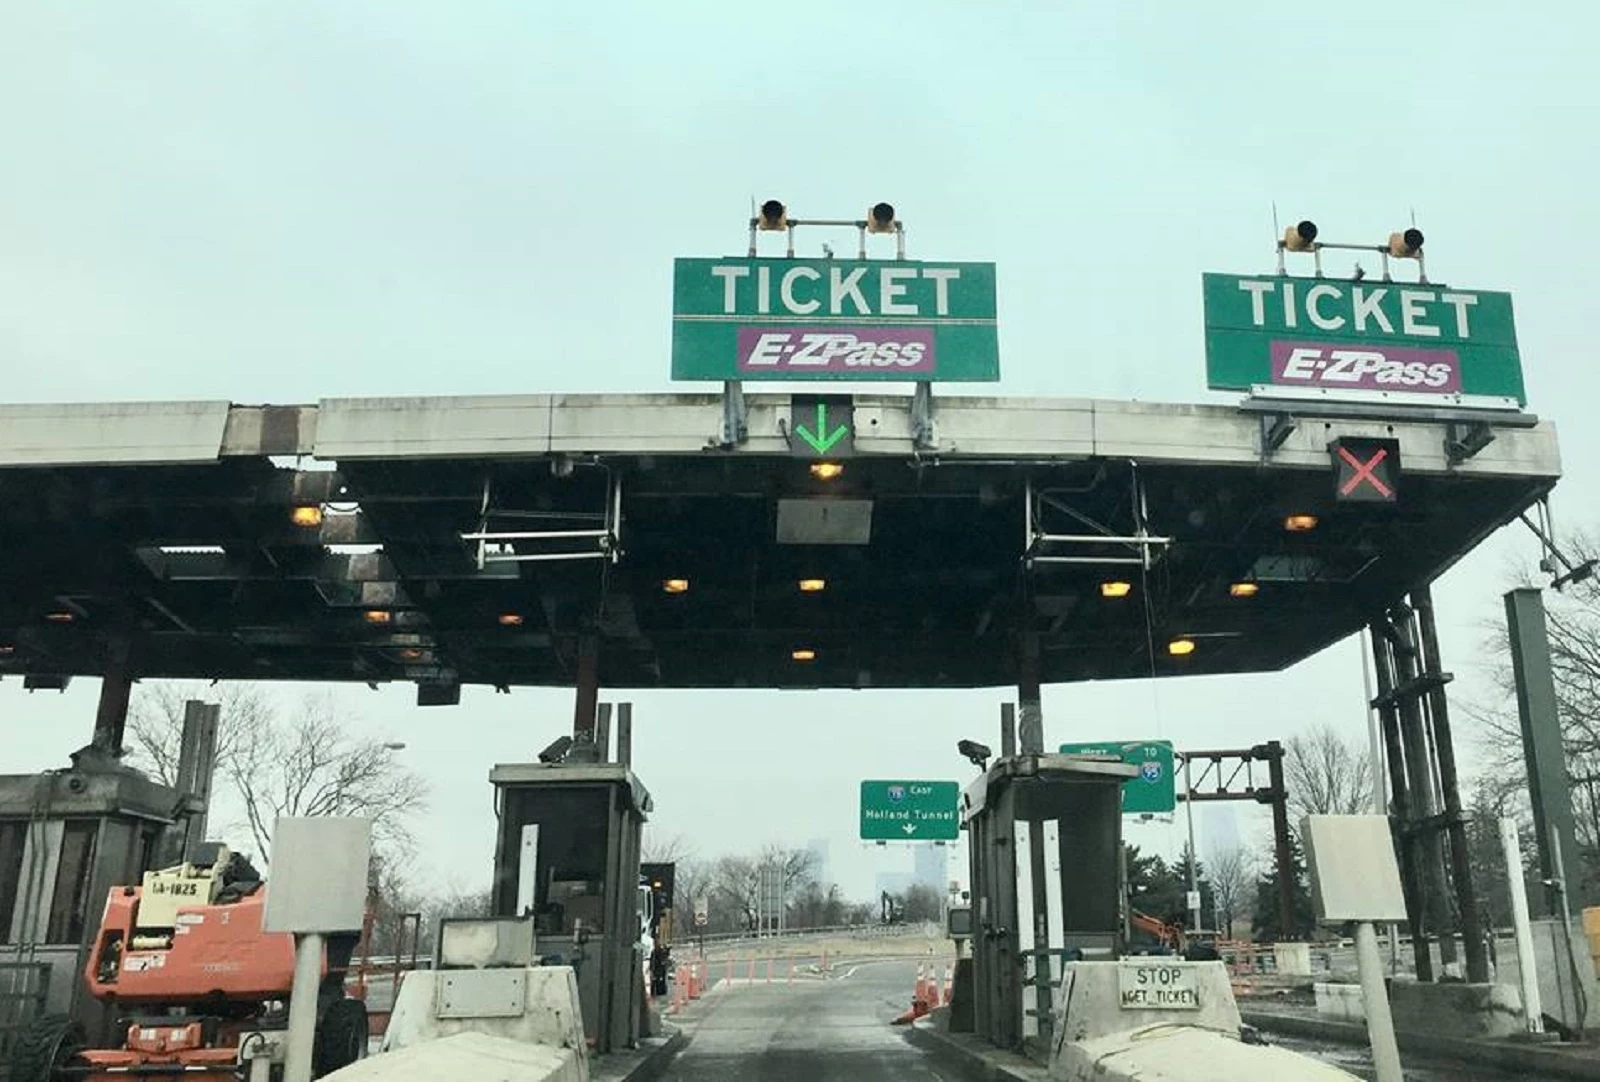 18 Garden state parkway toll cost ideas in 2022 